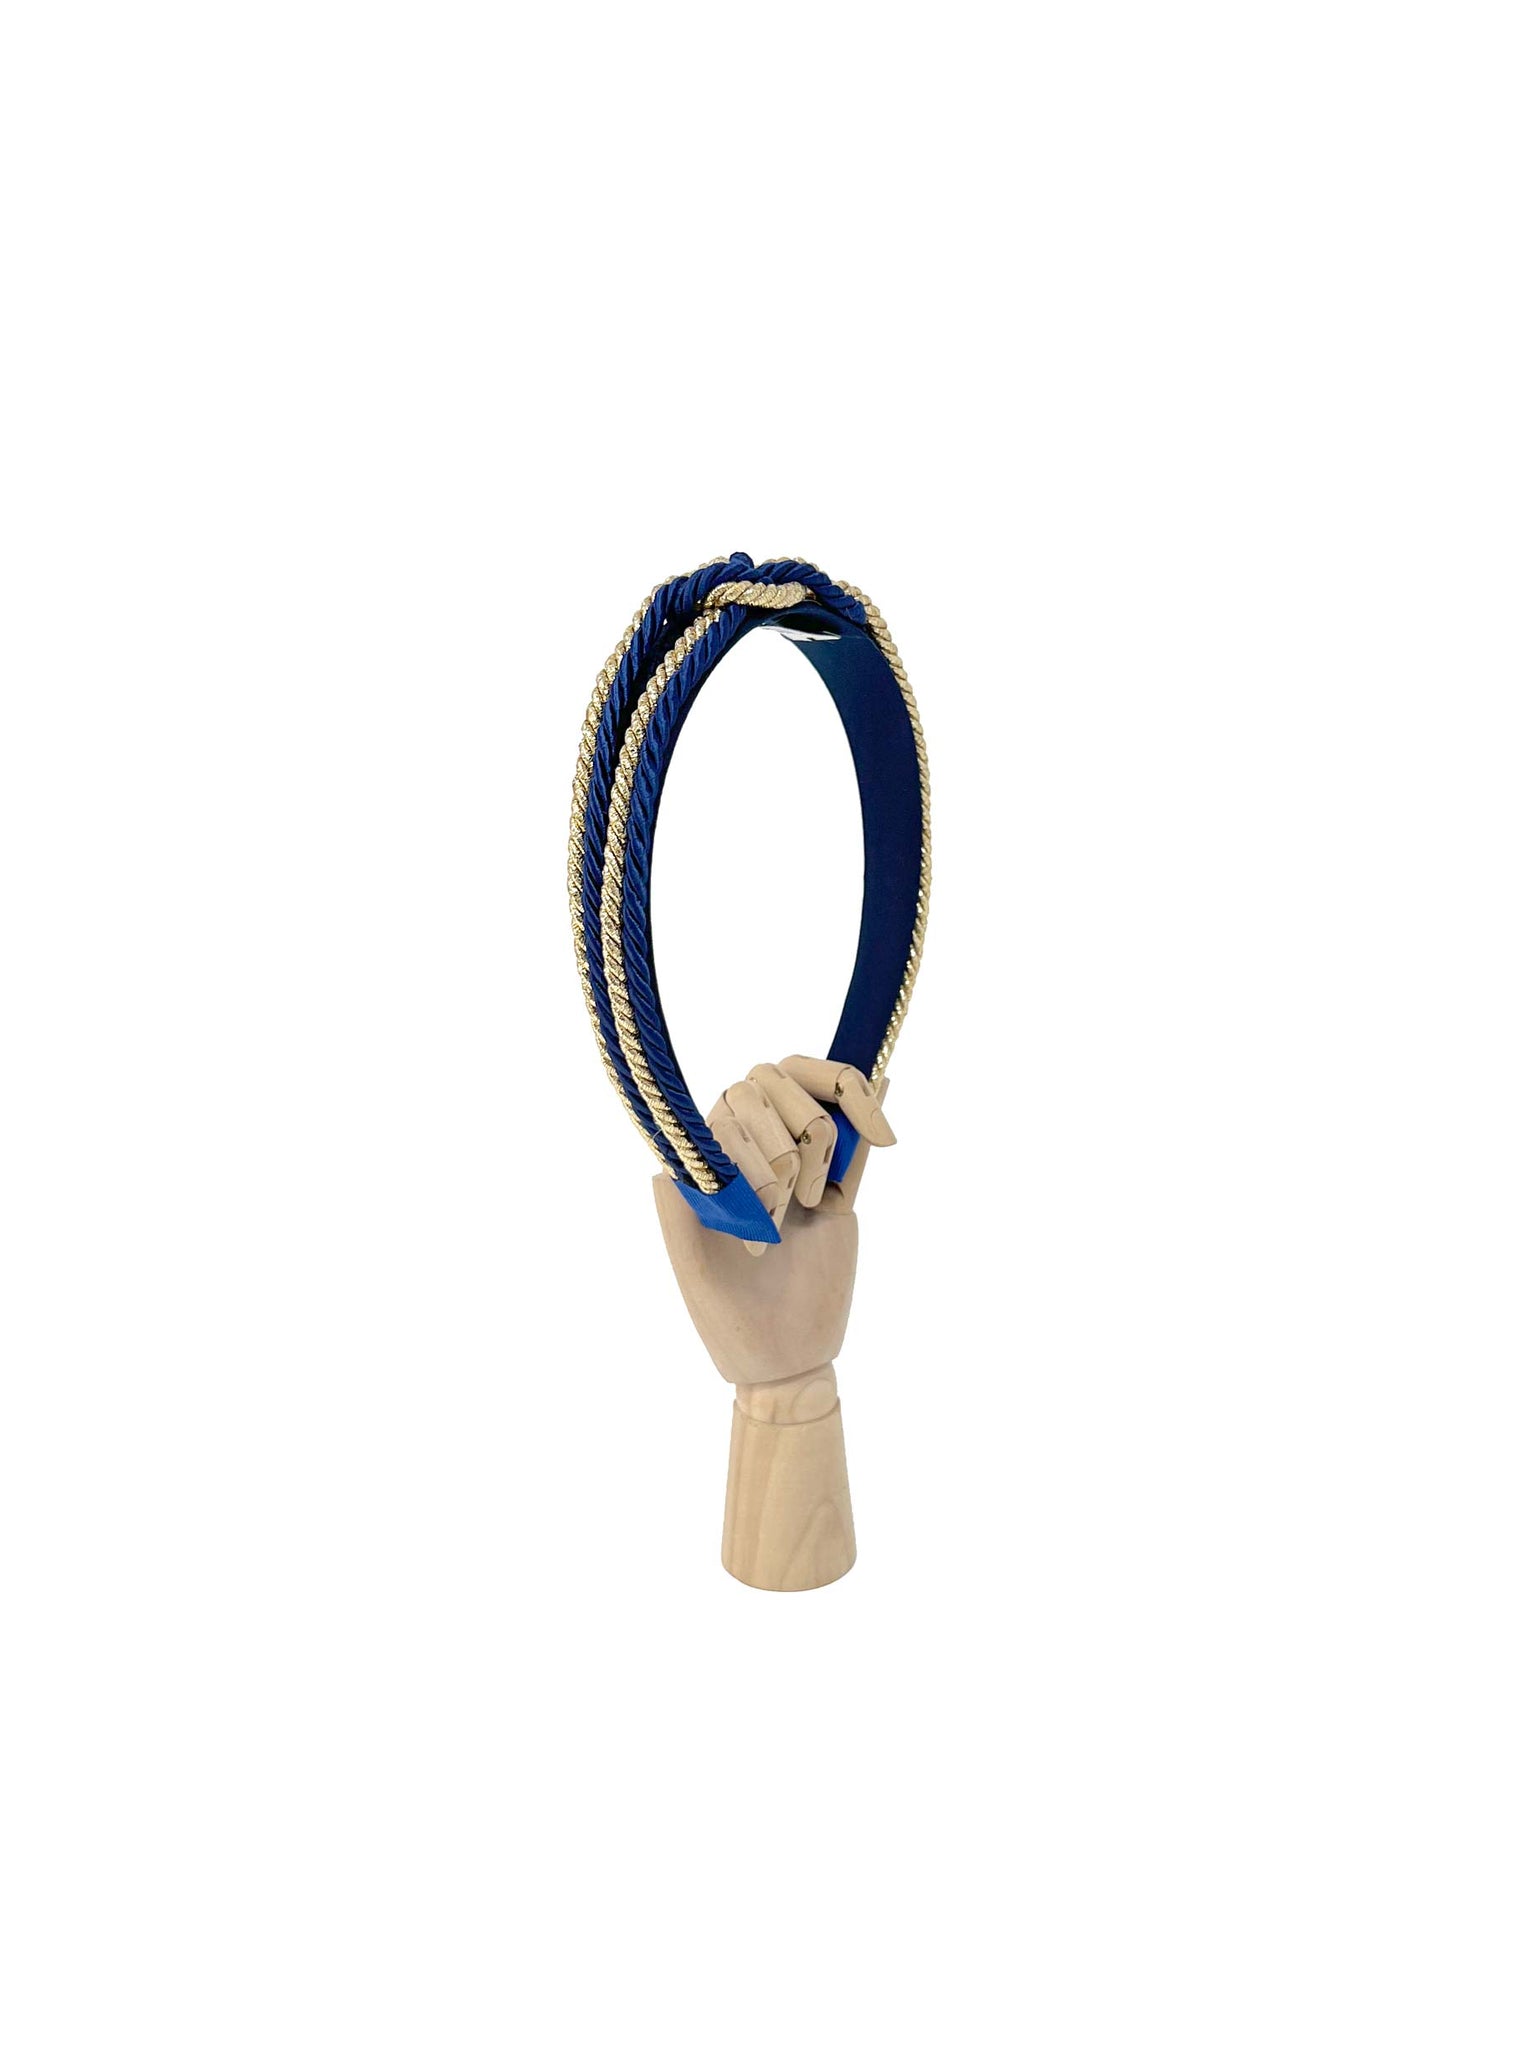 Blue and gold three-strand hairband with central braided knot